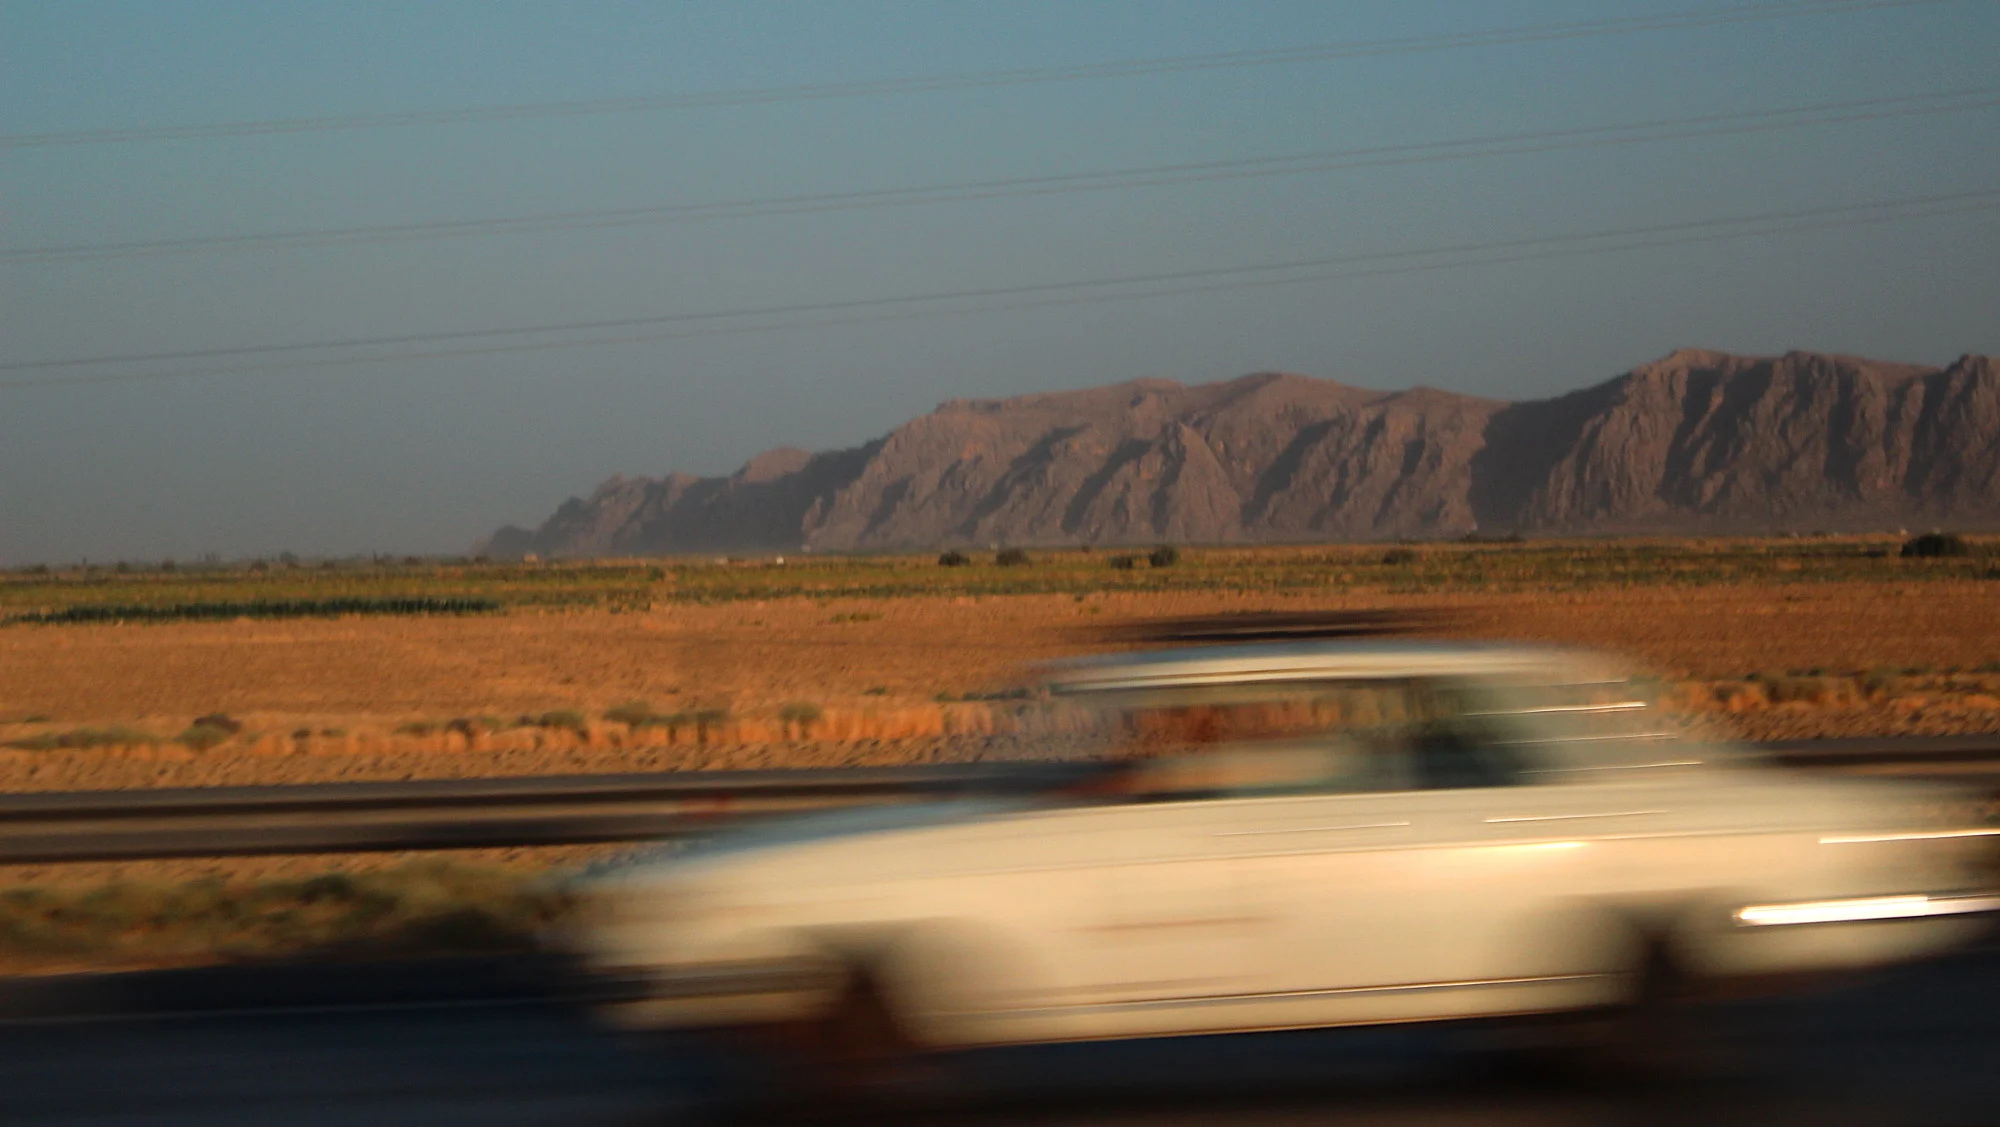 Guided tour of Iran. An atmospheric travel picture of a car driving past with sunset, desert and mountains.